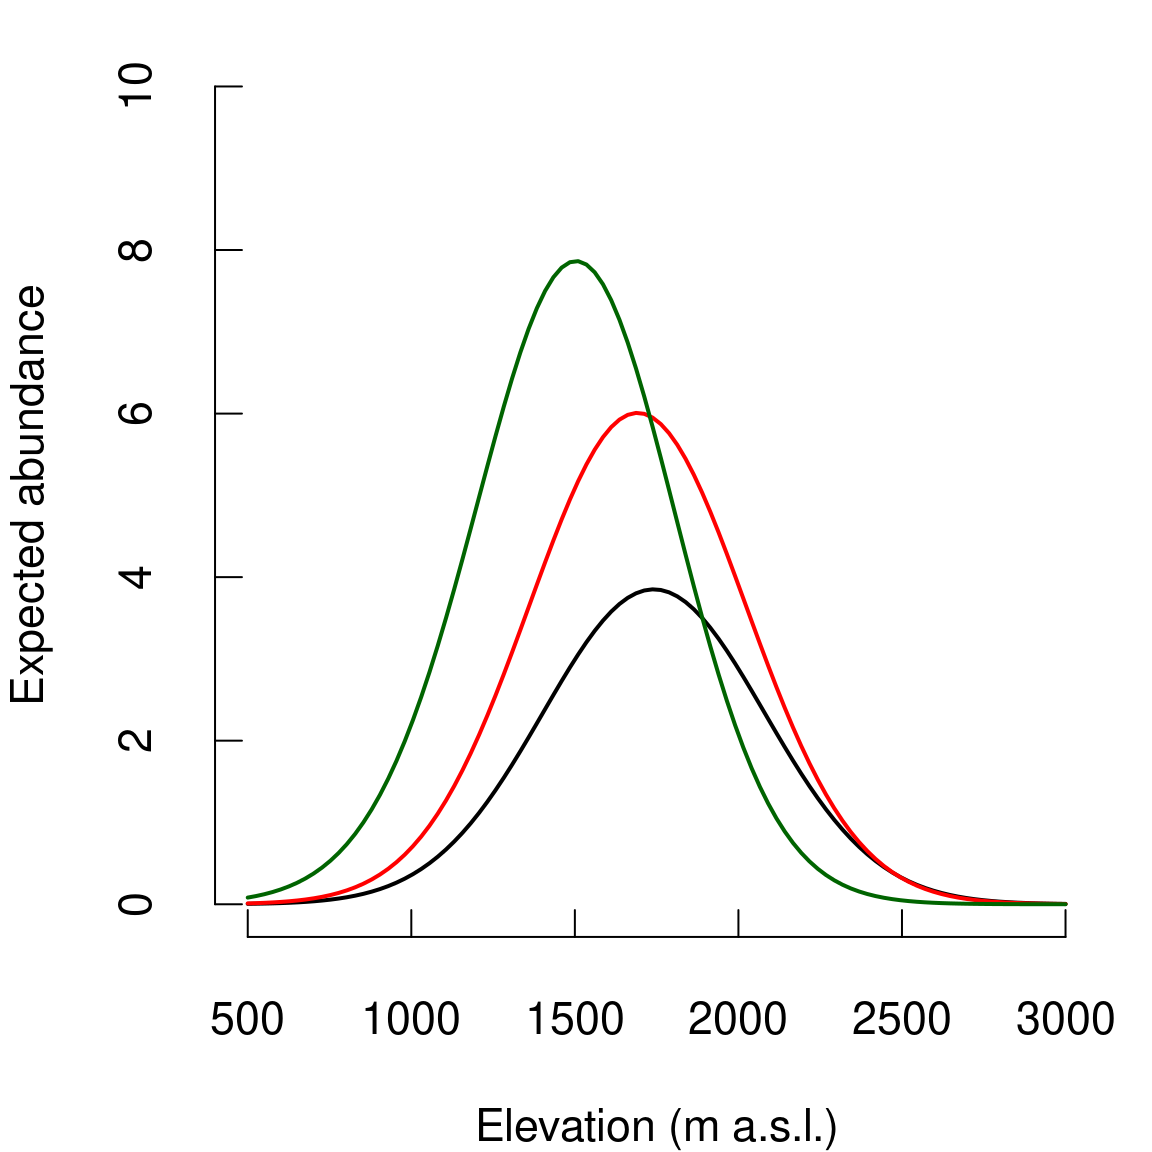 Relationship between abundance and altitude. Black: Poisson model, Red: N-mixture model, Green: N-mixture model with iCAR.